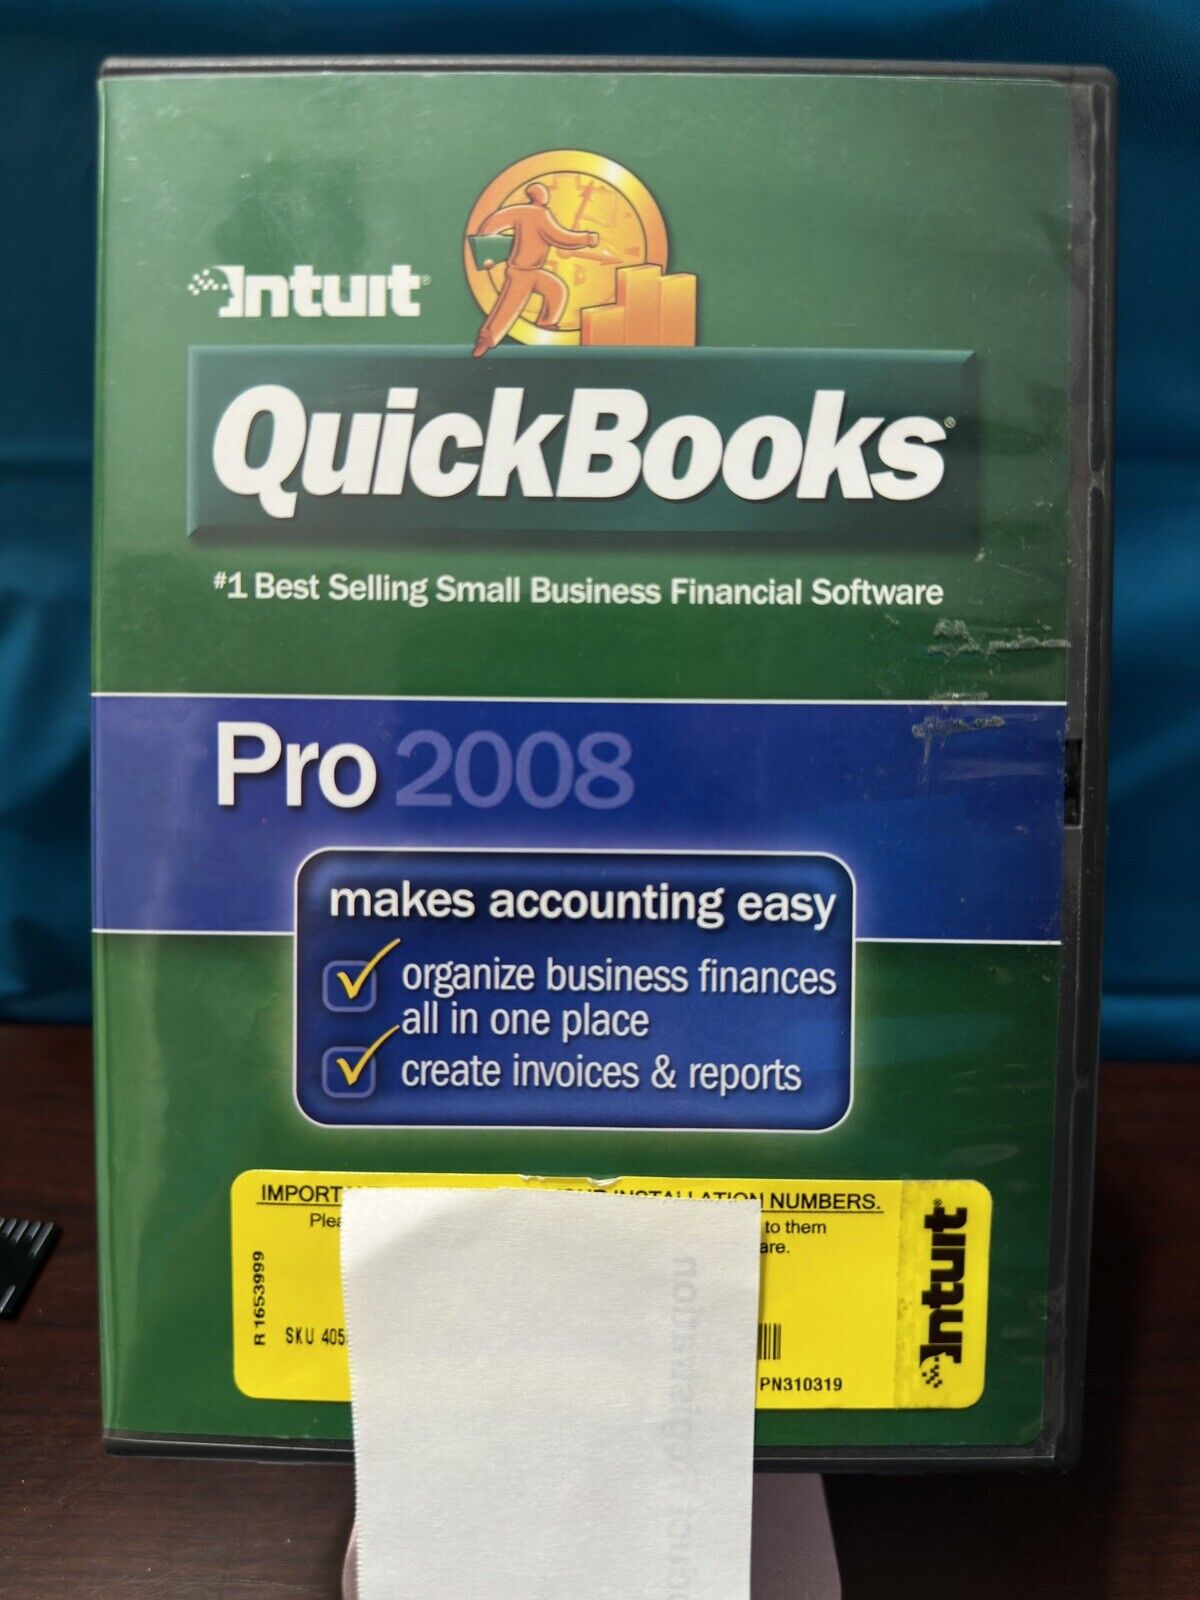 Intuit QuickBooks Pro 2008 for Windows Small Business Financial Software